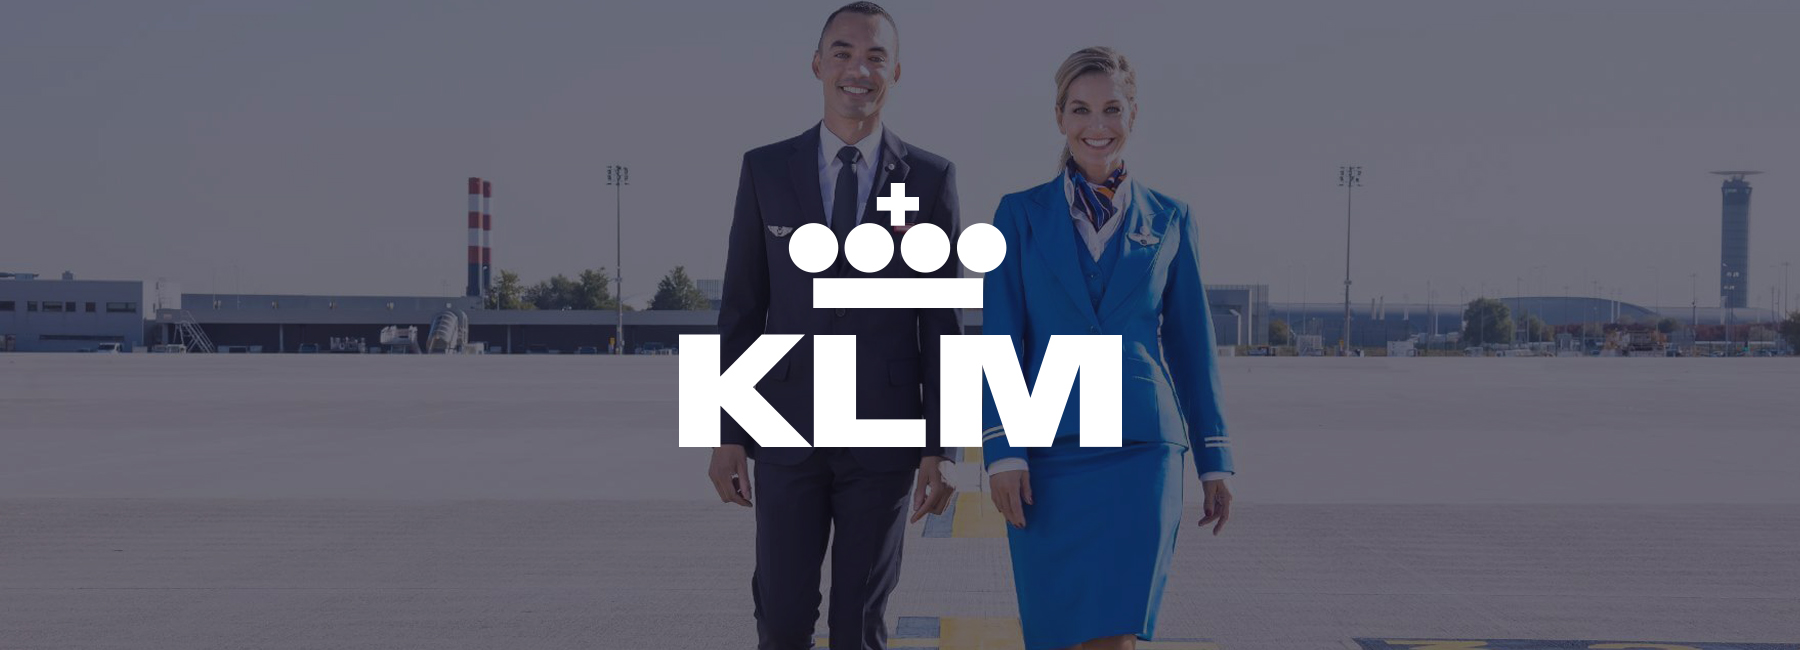 Air France-KLM improves its internal knowledge system with Mopinion